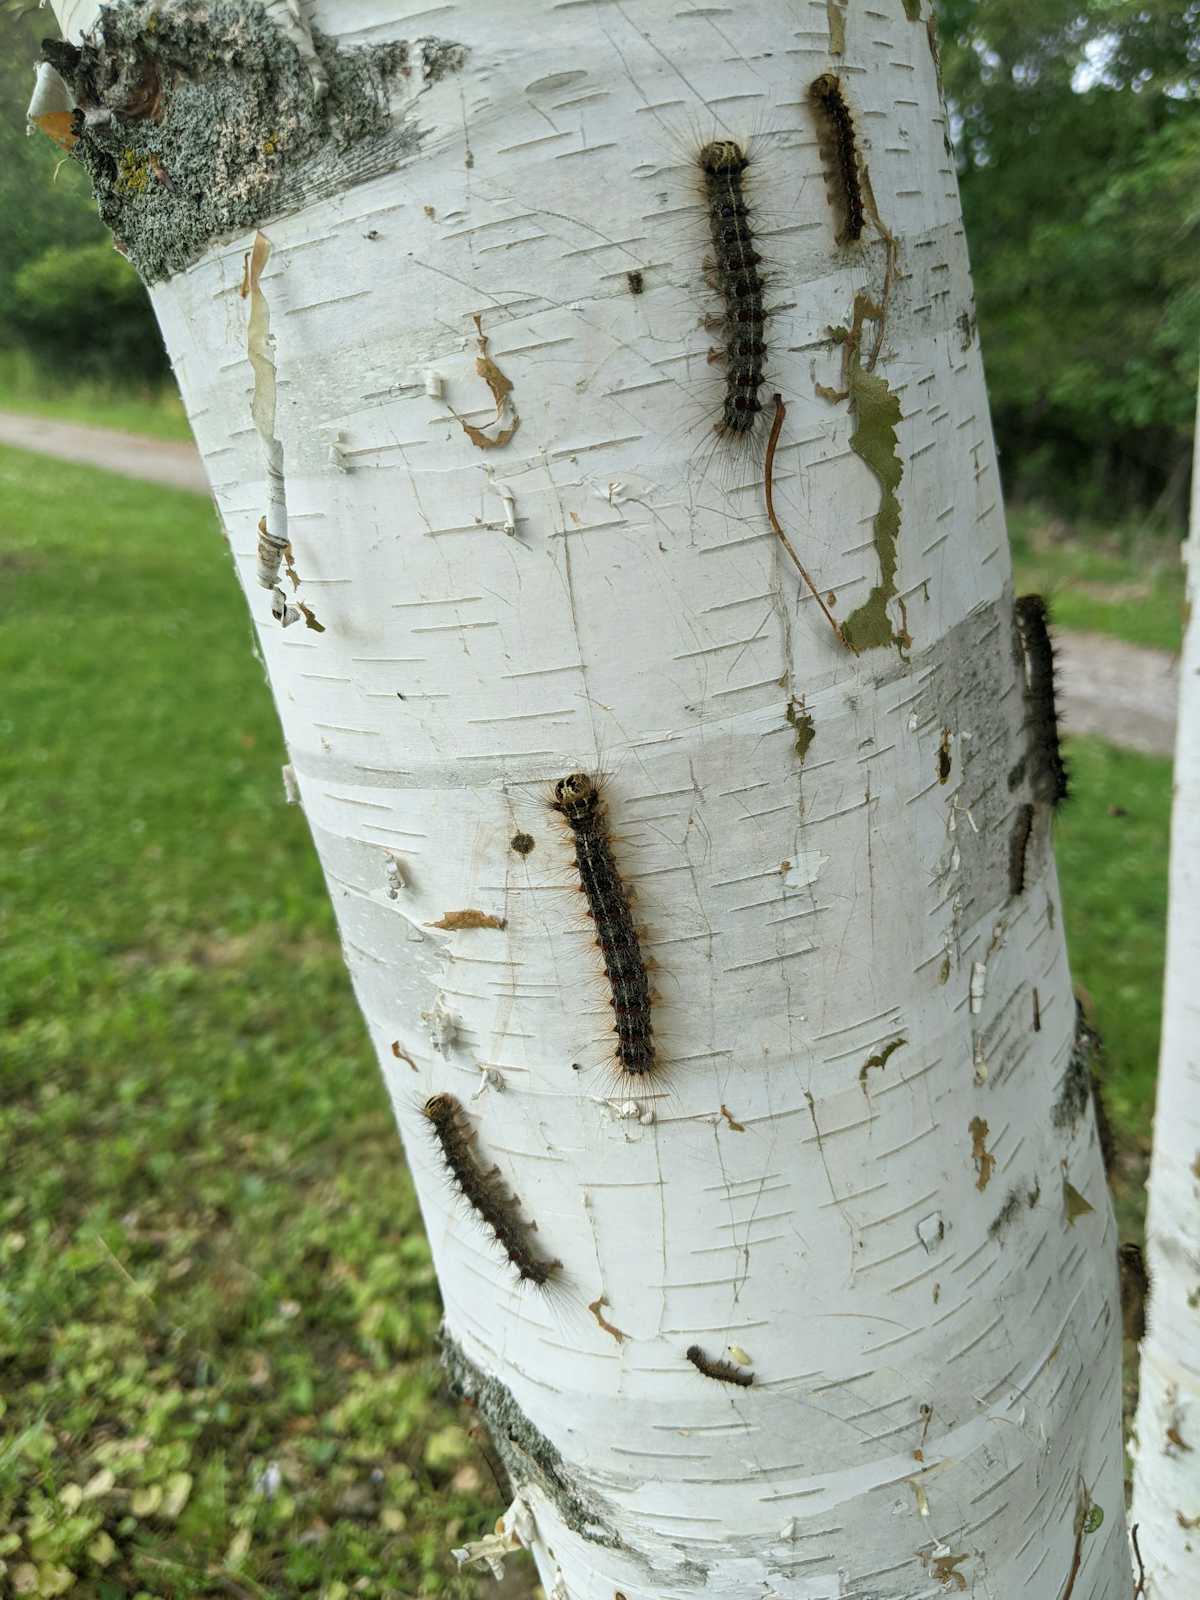 Why An Invasive Caterpillar Is Munching Its Way Through Tree Leaves In The Largest Outbreak In